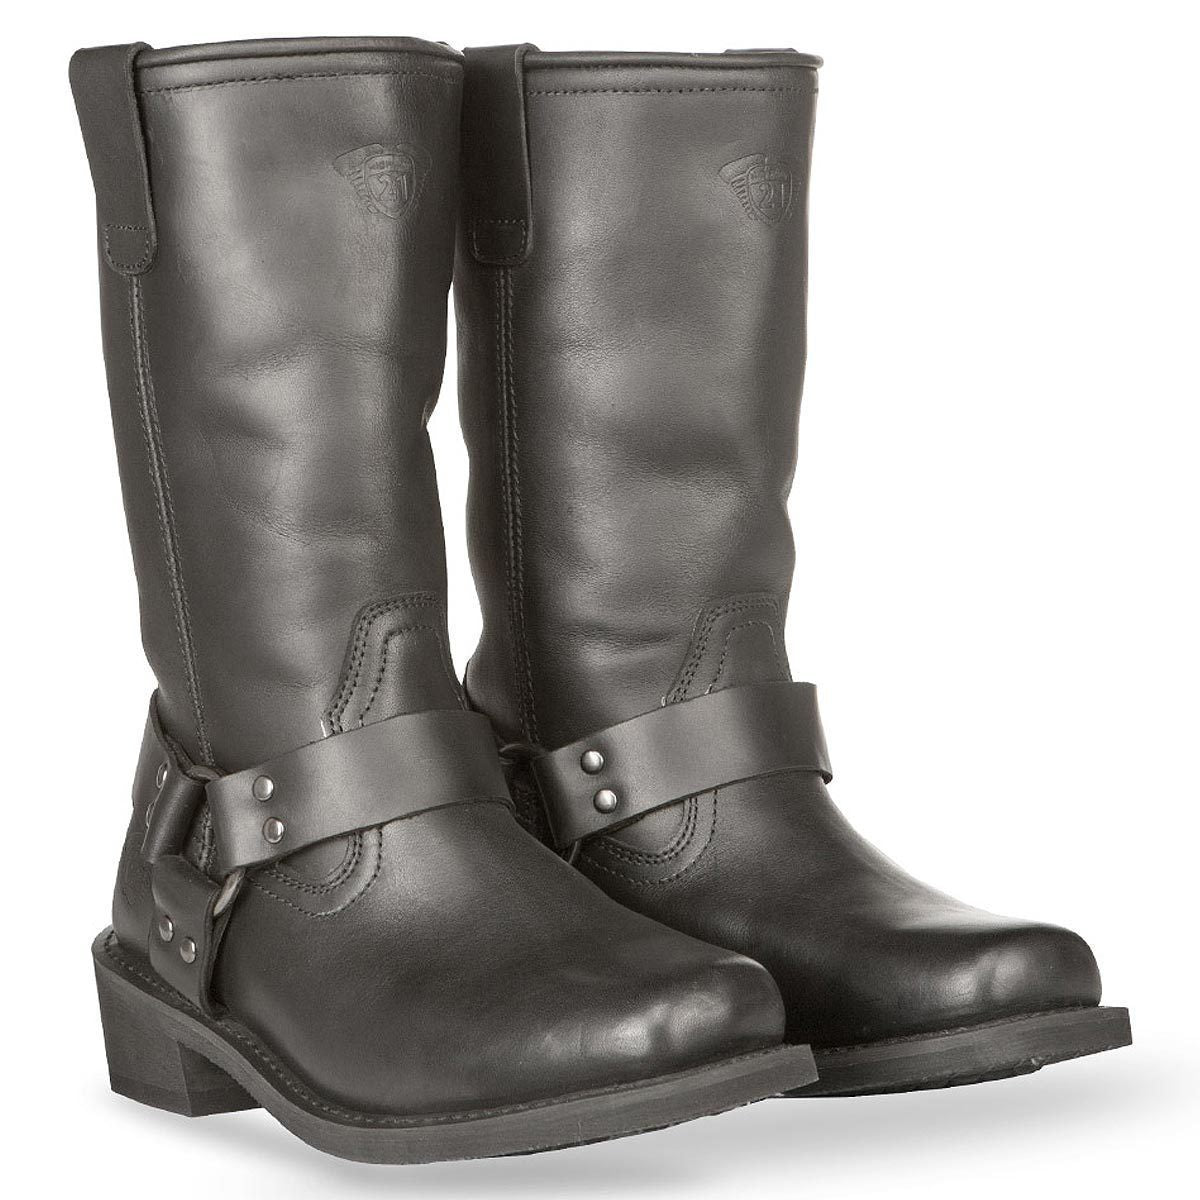 Highway 21 Spark Men's Leather Harness Boots